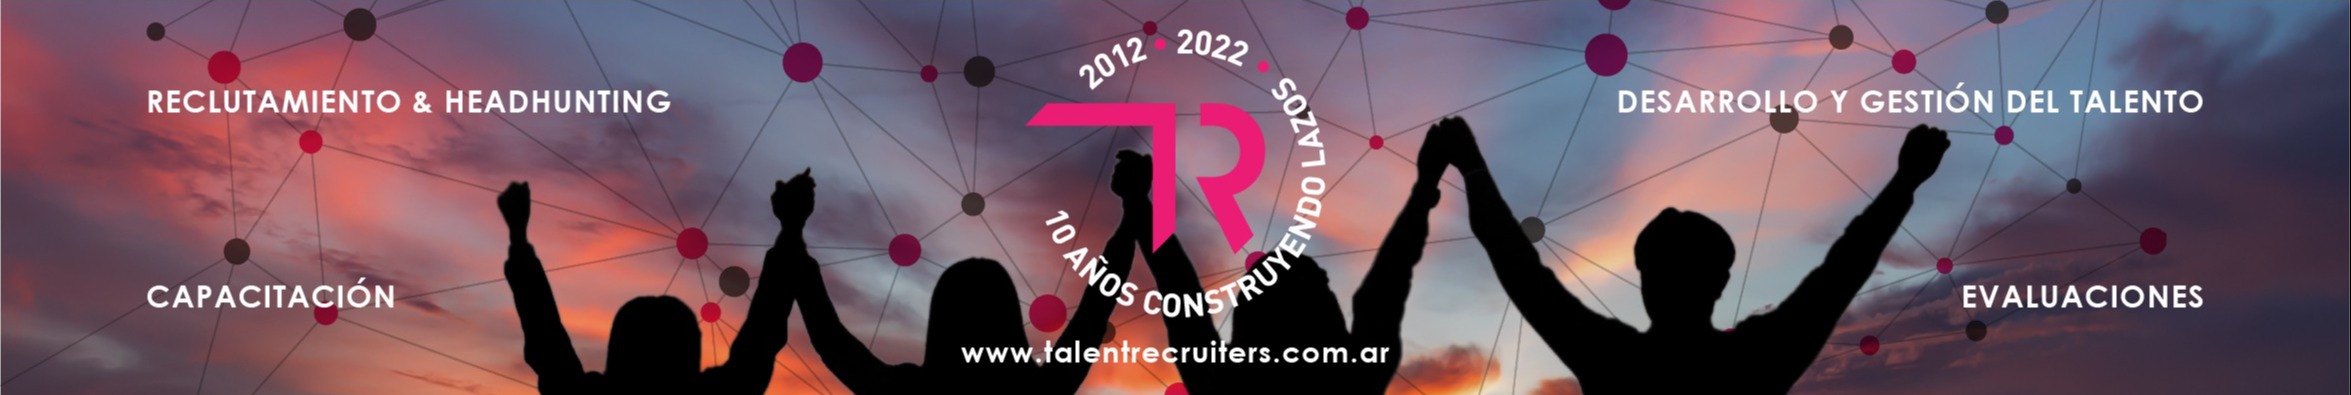 Talent Recruiters background